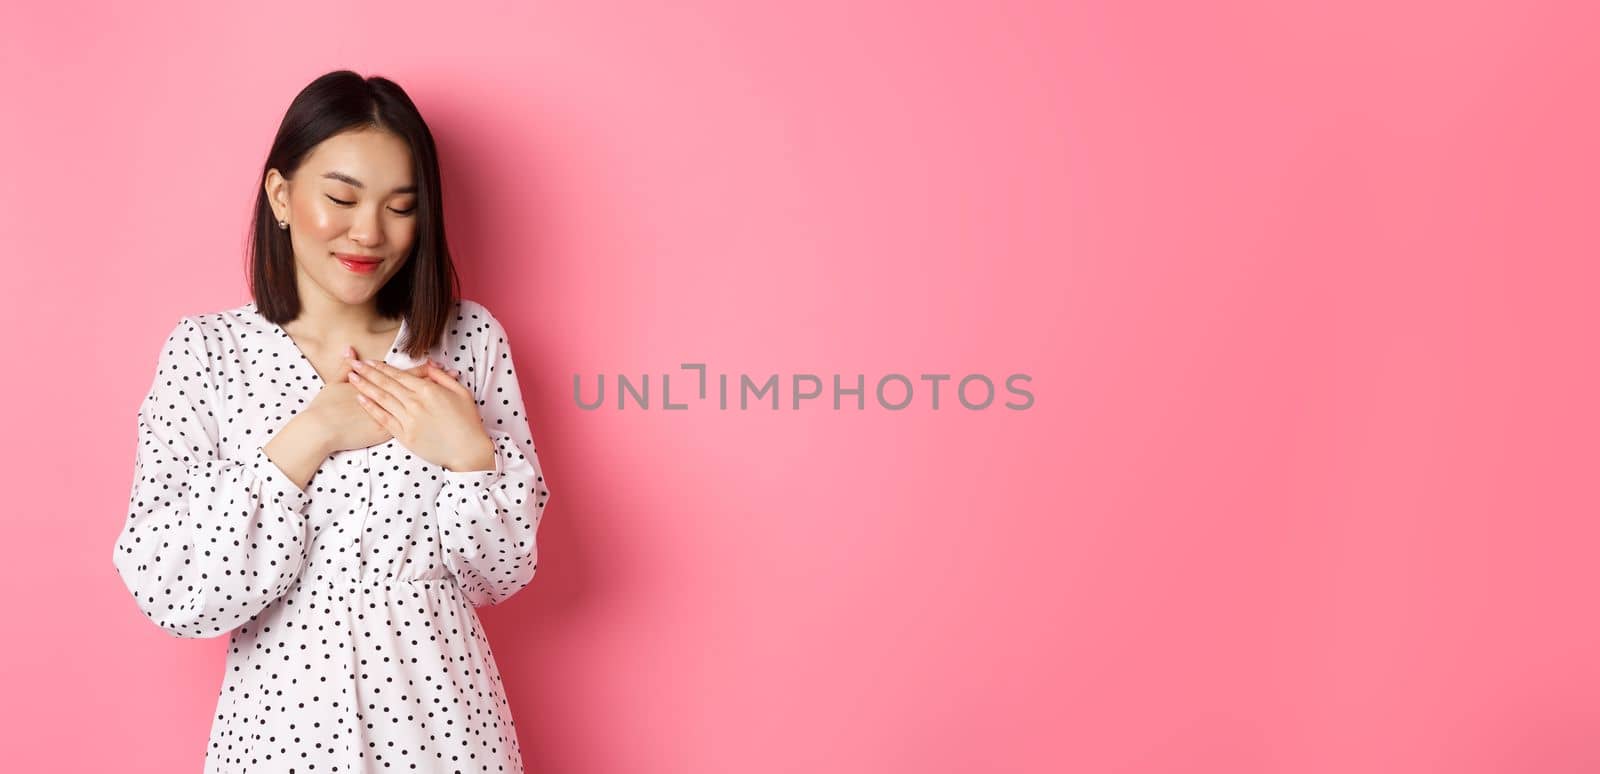 Beautiful korean girl in trendy spring dress dreaming, holding hands on heart, smiling with closed eyes, imaging something or having heartwarming memory, pink background.